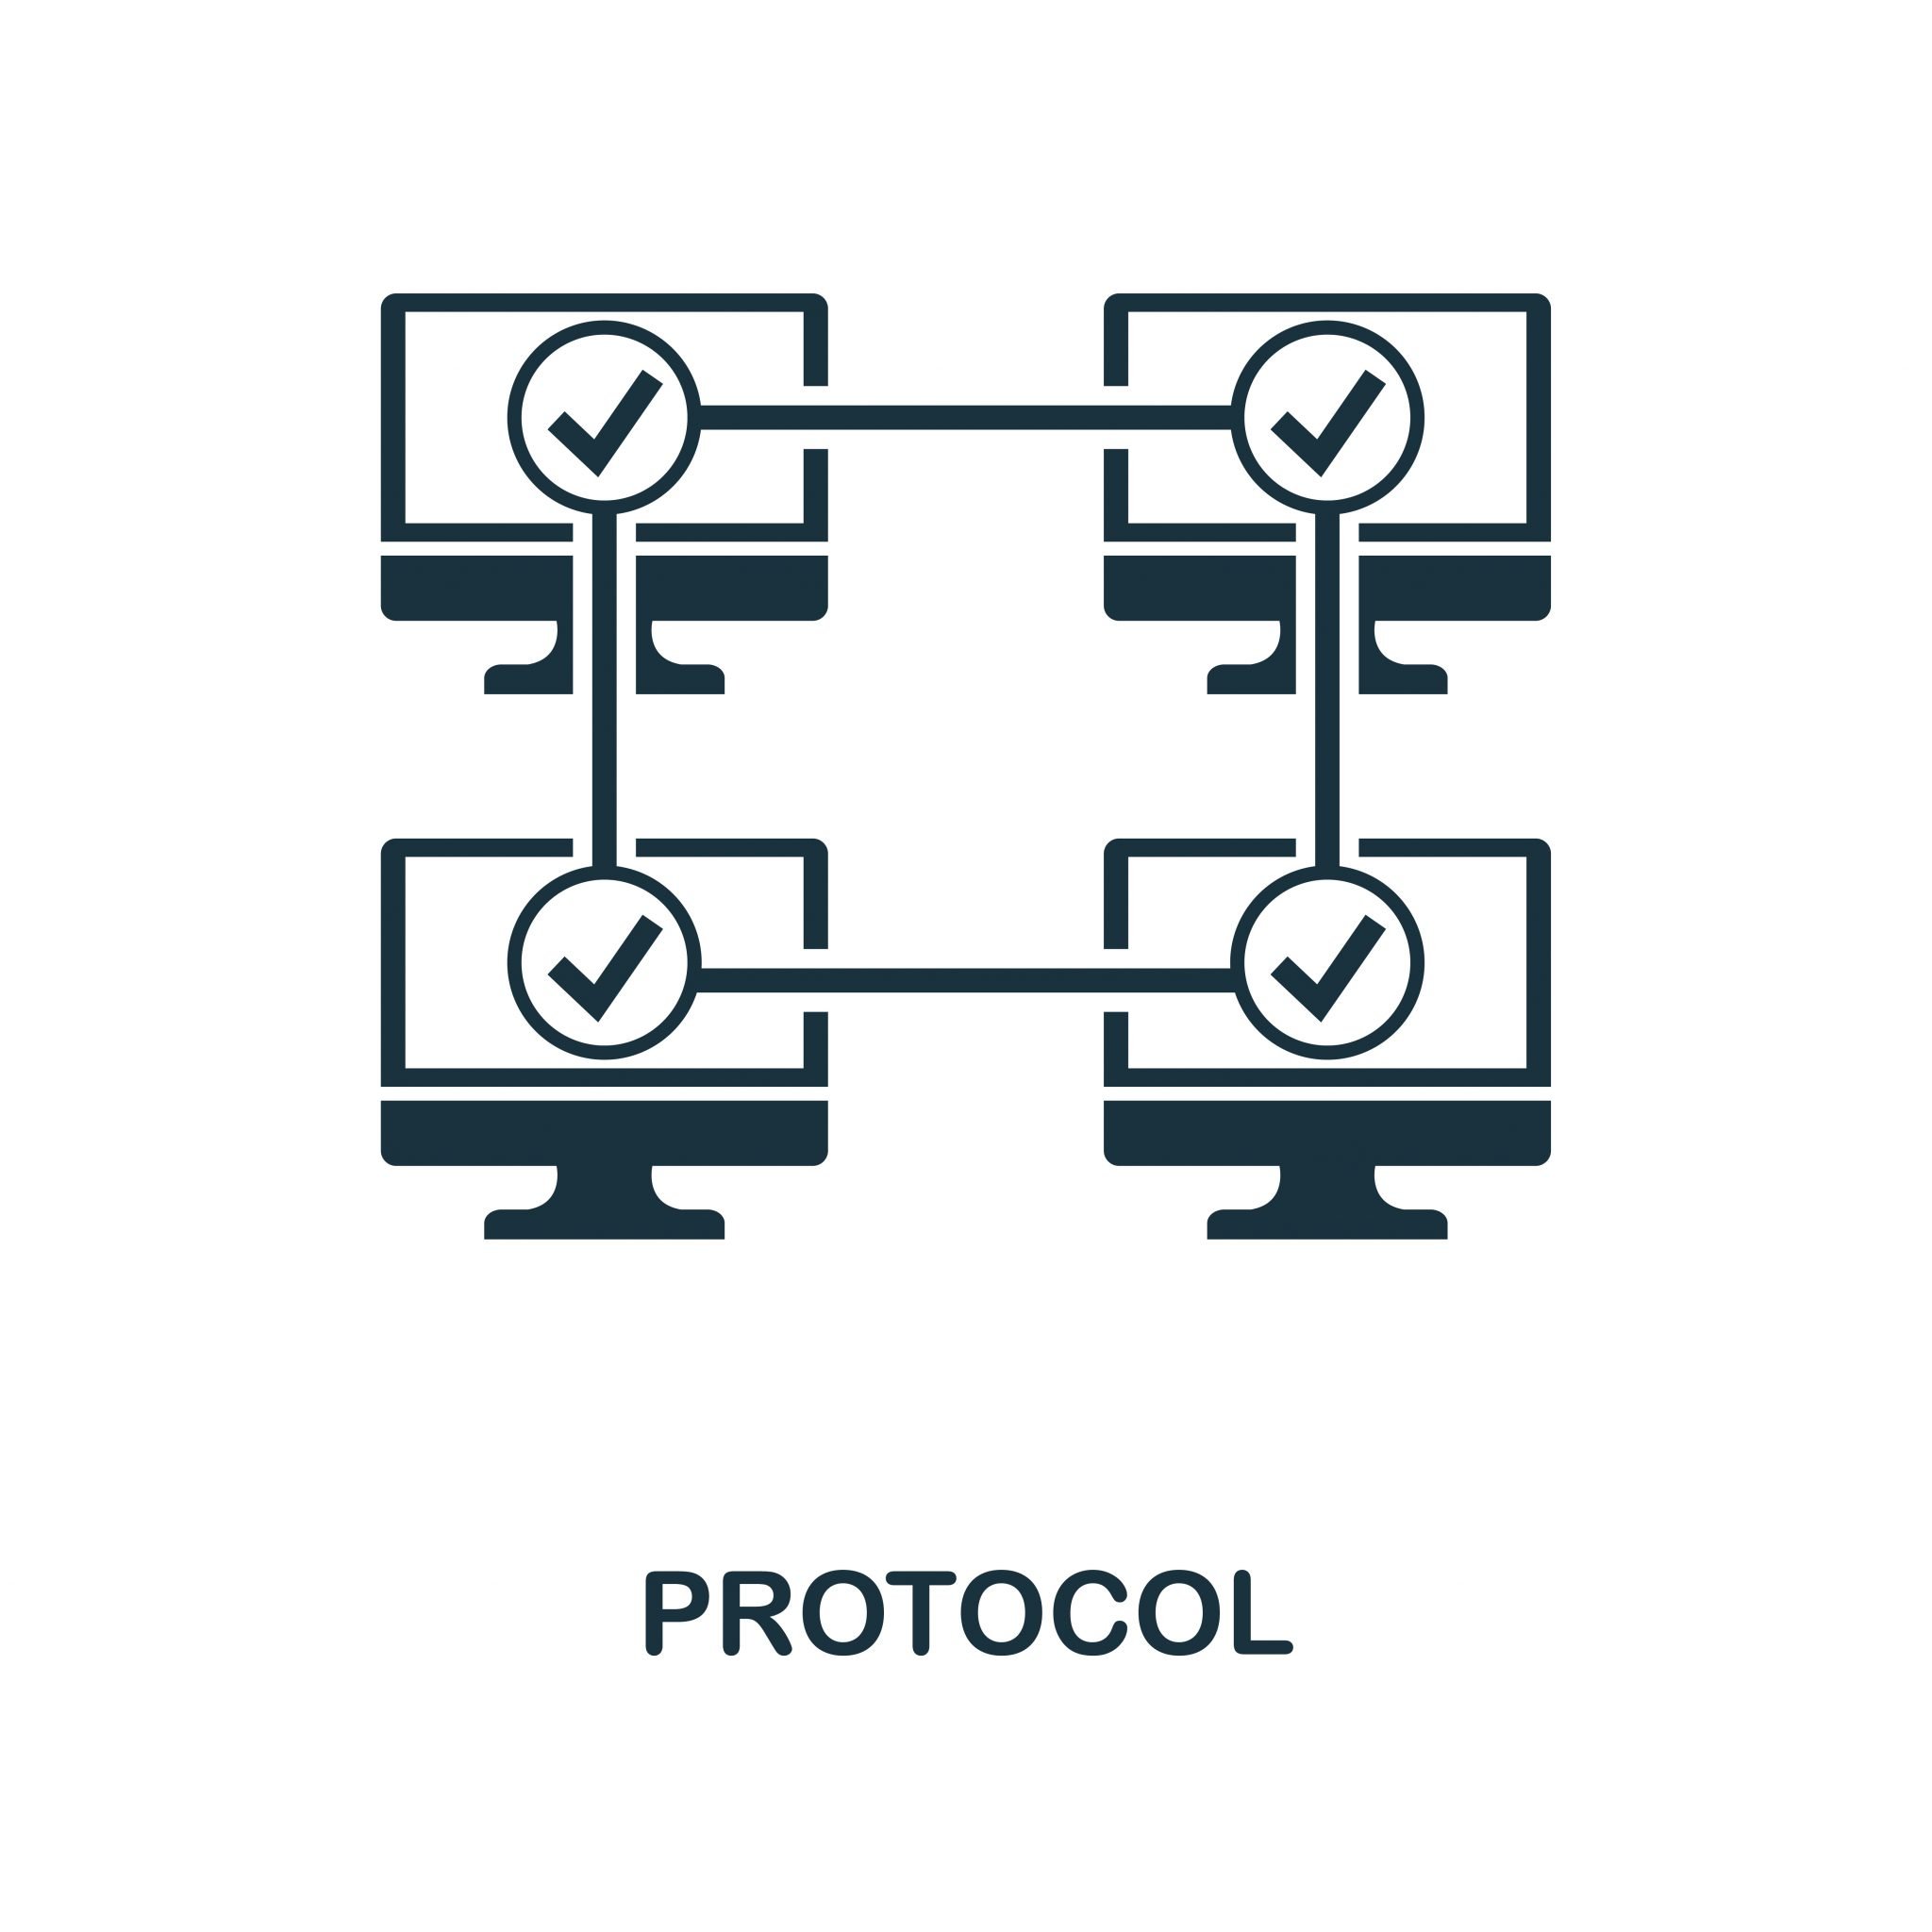 Protocol icon. Monochrome style design from blockchain icon collection. UI and UX. Pixel perfect protocol icon. For web design, apps, software, print usage.